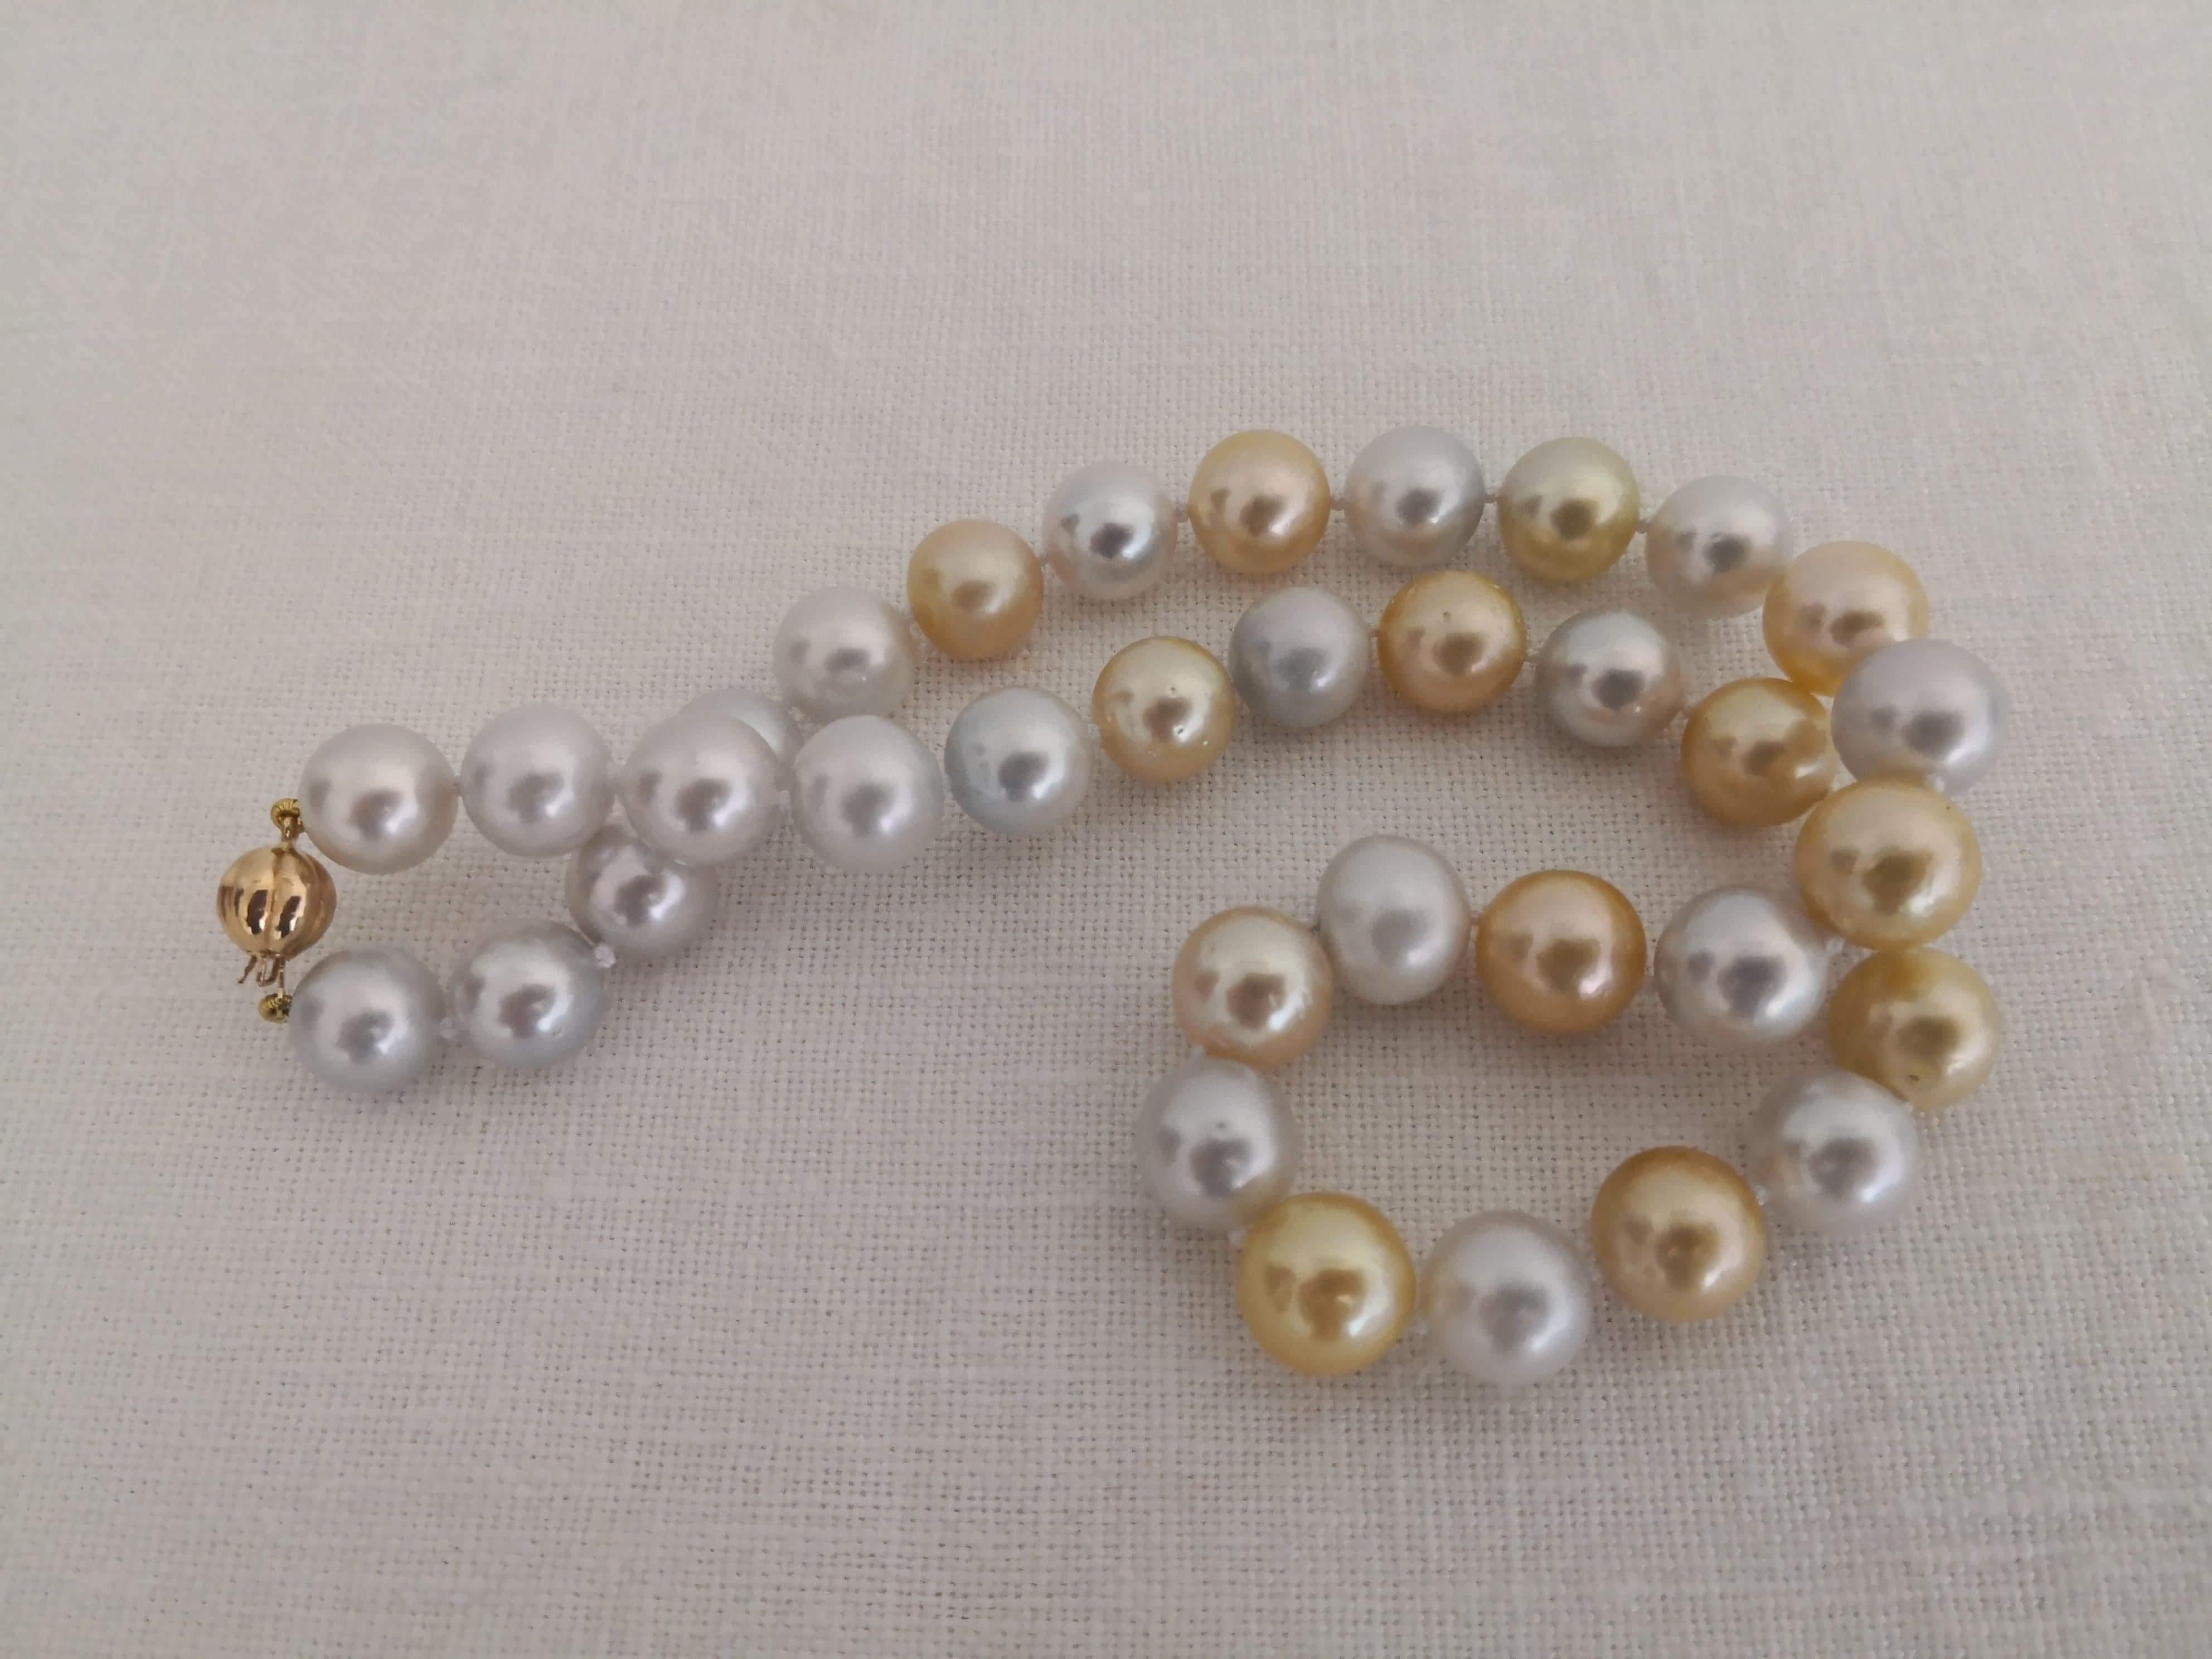 A Natural Color South Sea Pearls necklace

- Size of Pearls 11-12 mm of diameter.

- Pearls from Pinctada Maxima Oyster

- Origin: Indonesia ocean waters

- Natural Color Gold and Light Silver pearls

- High Natural luster and orient

- Pearls of